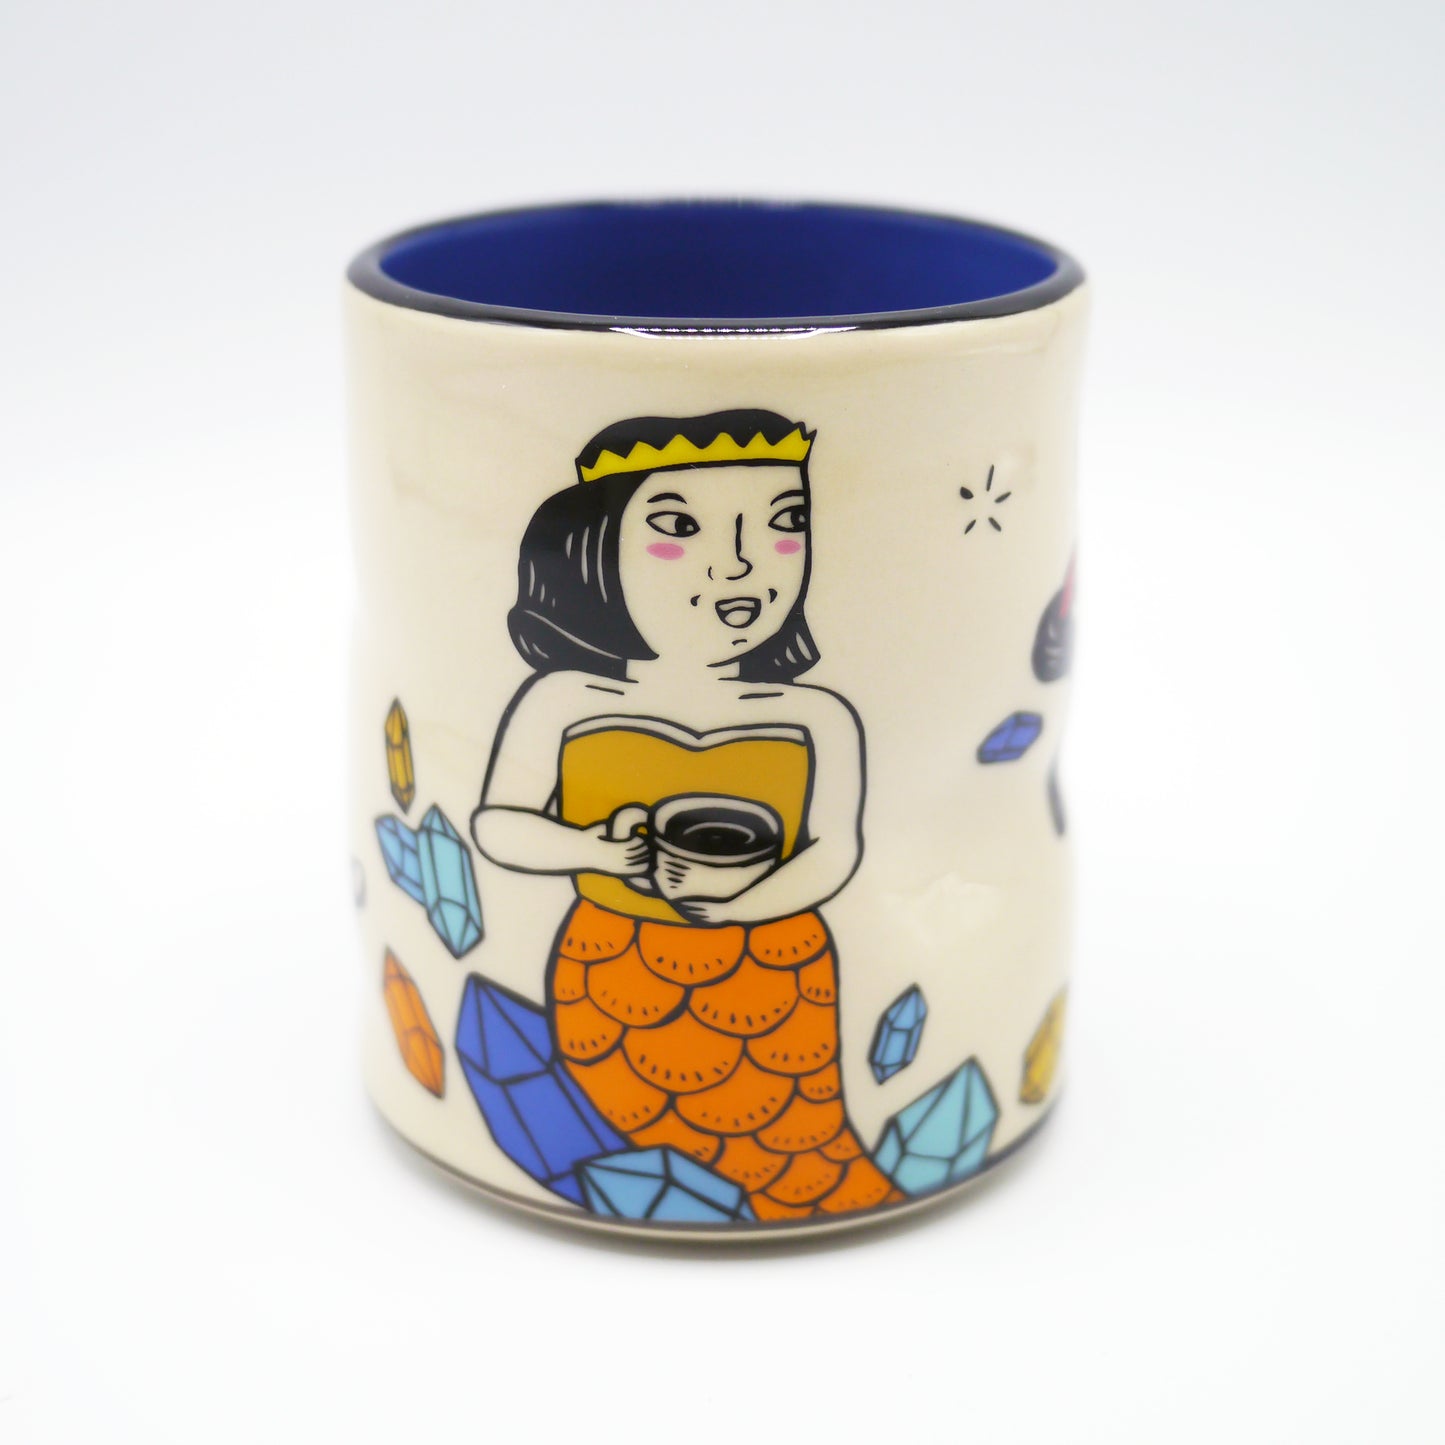 Mermaid Lucky Cup - Large